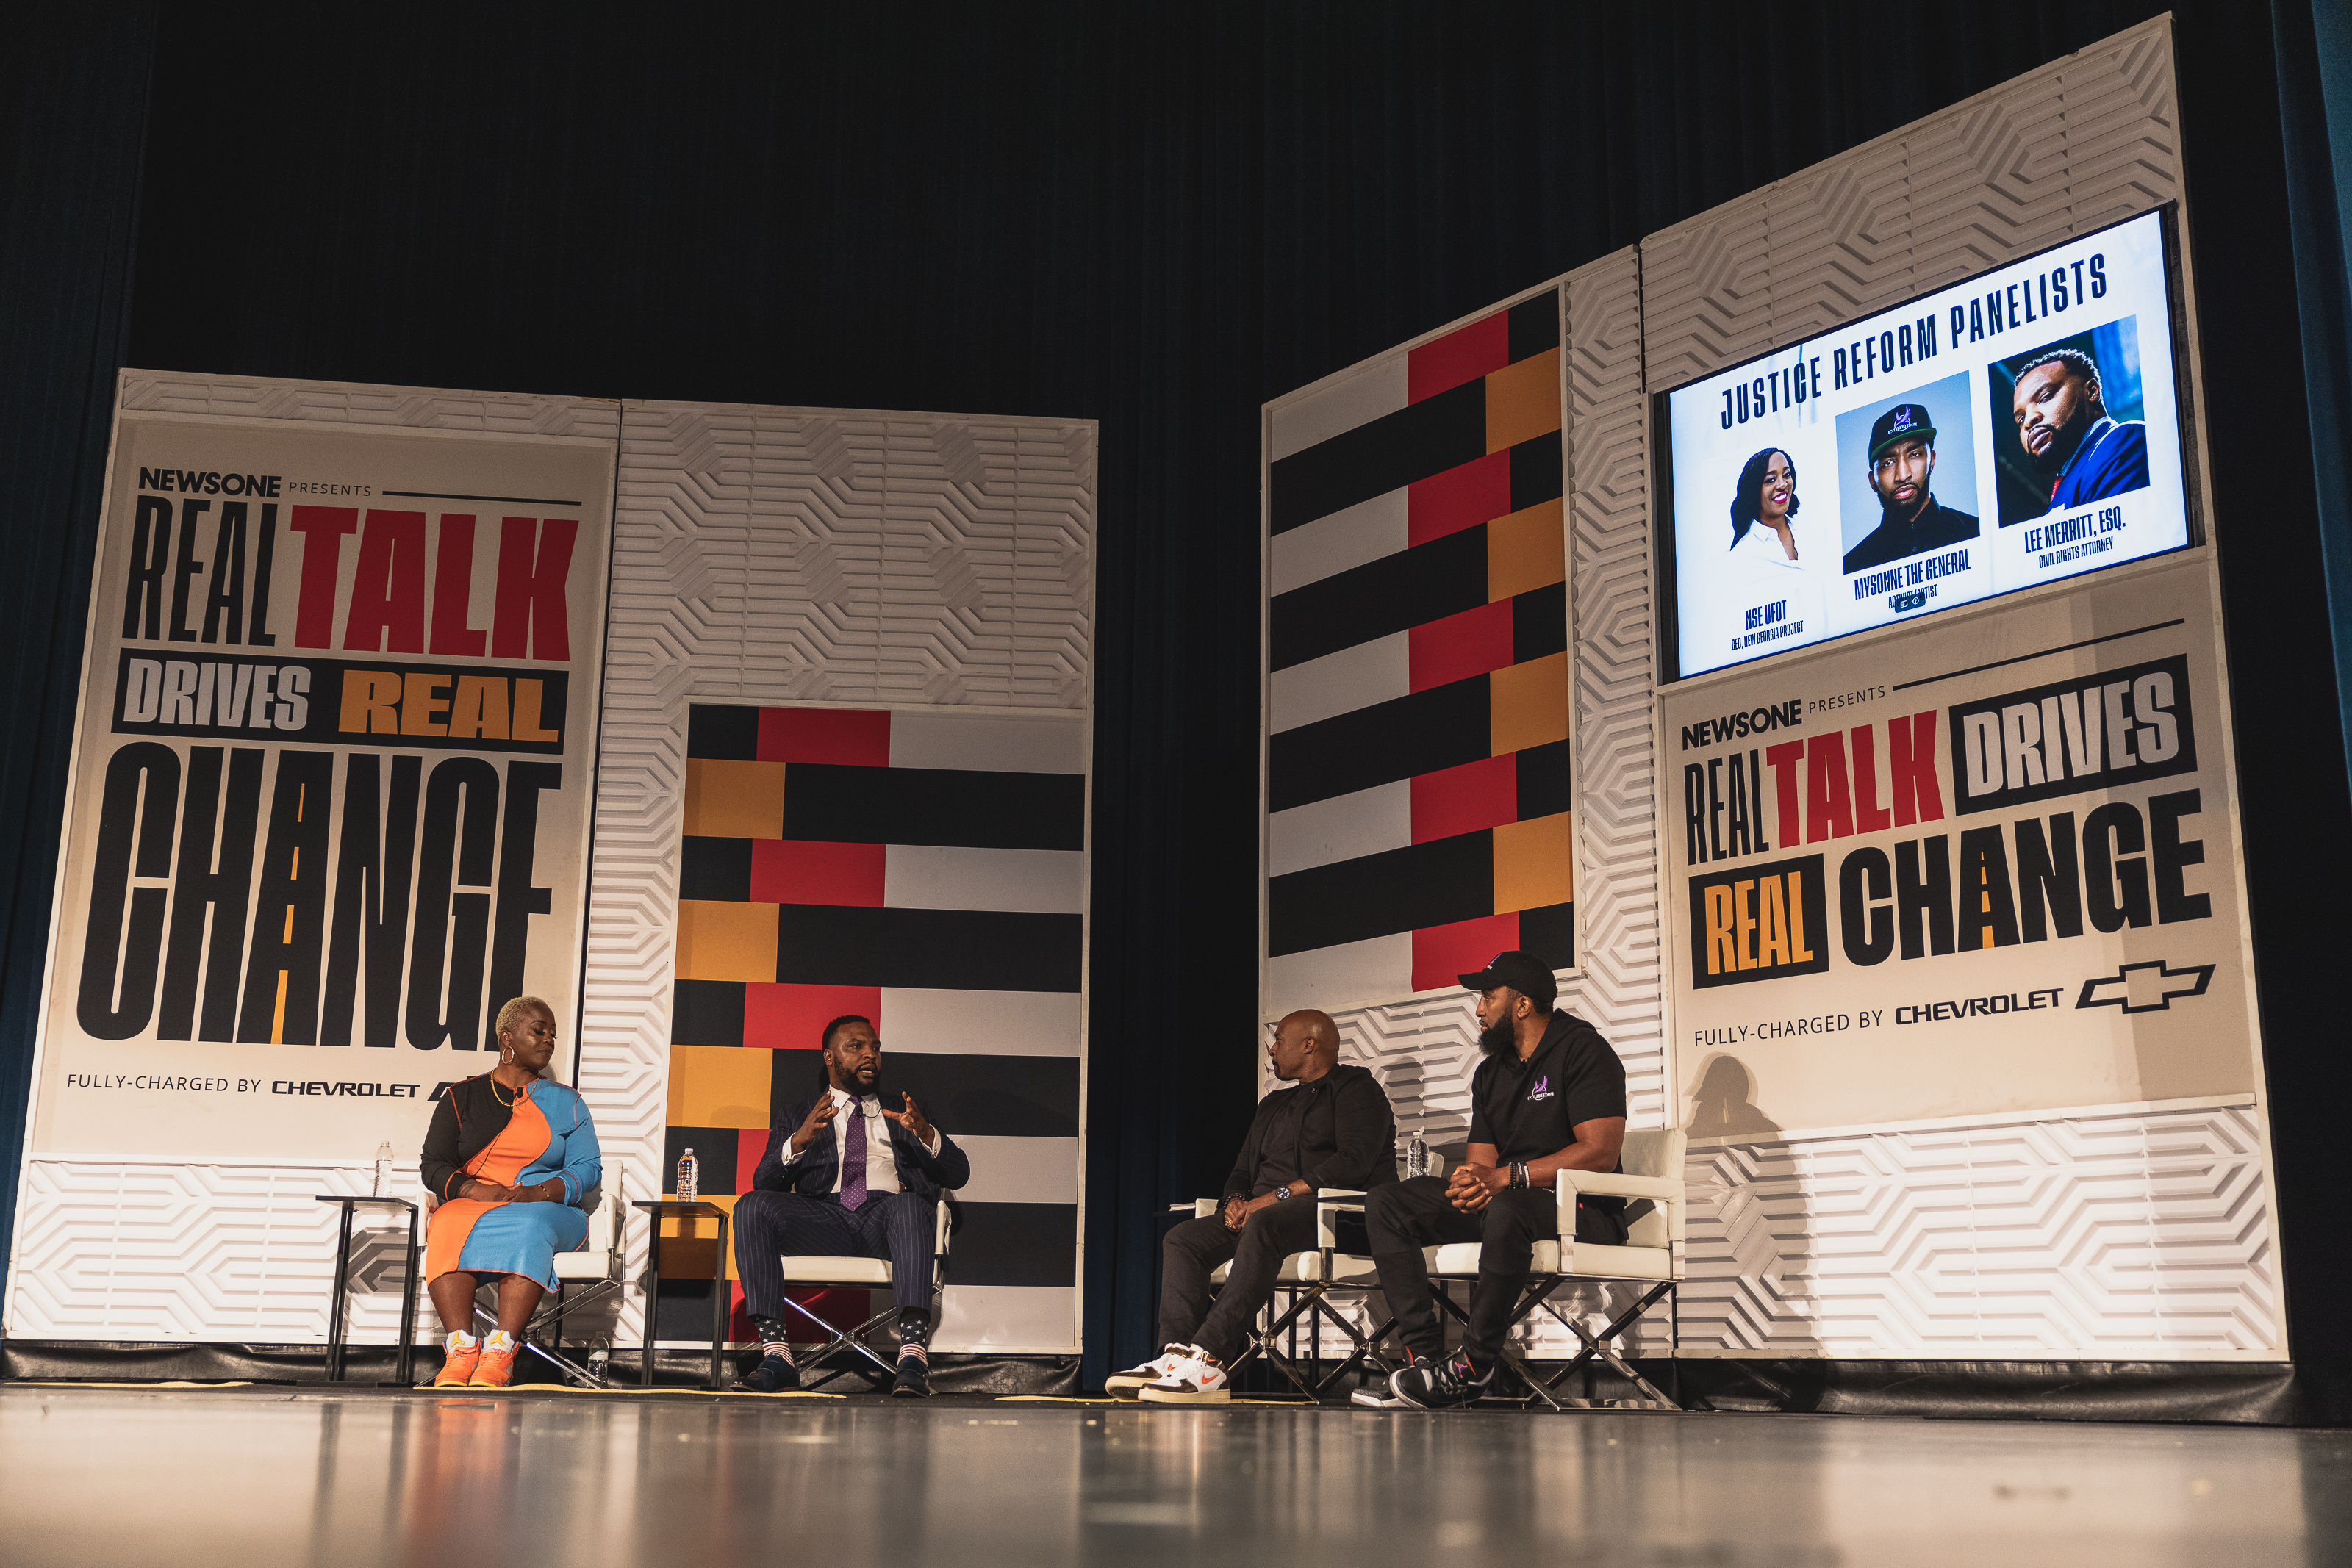 NewsOne Real Talk Drives Real Change Campaign